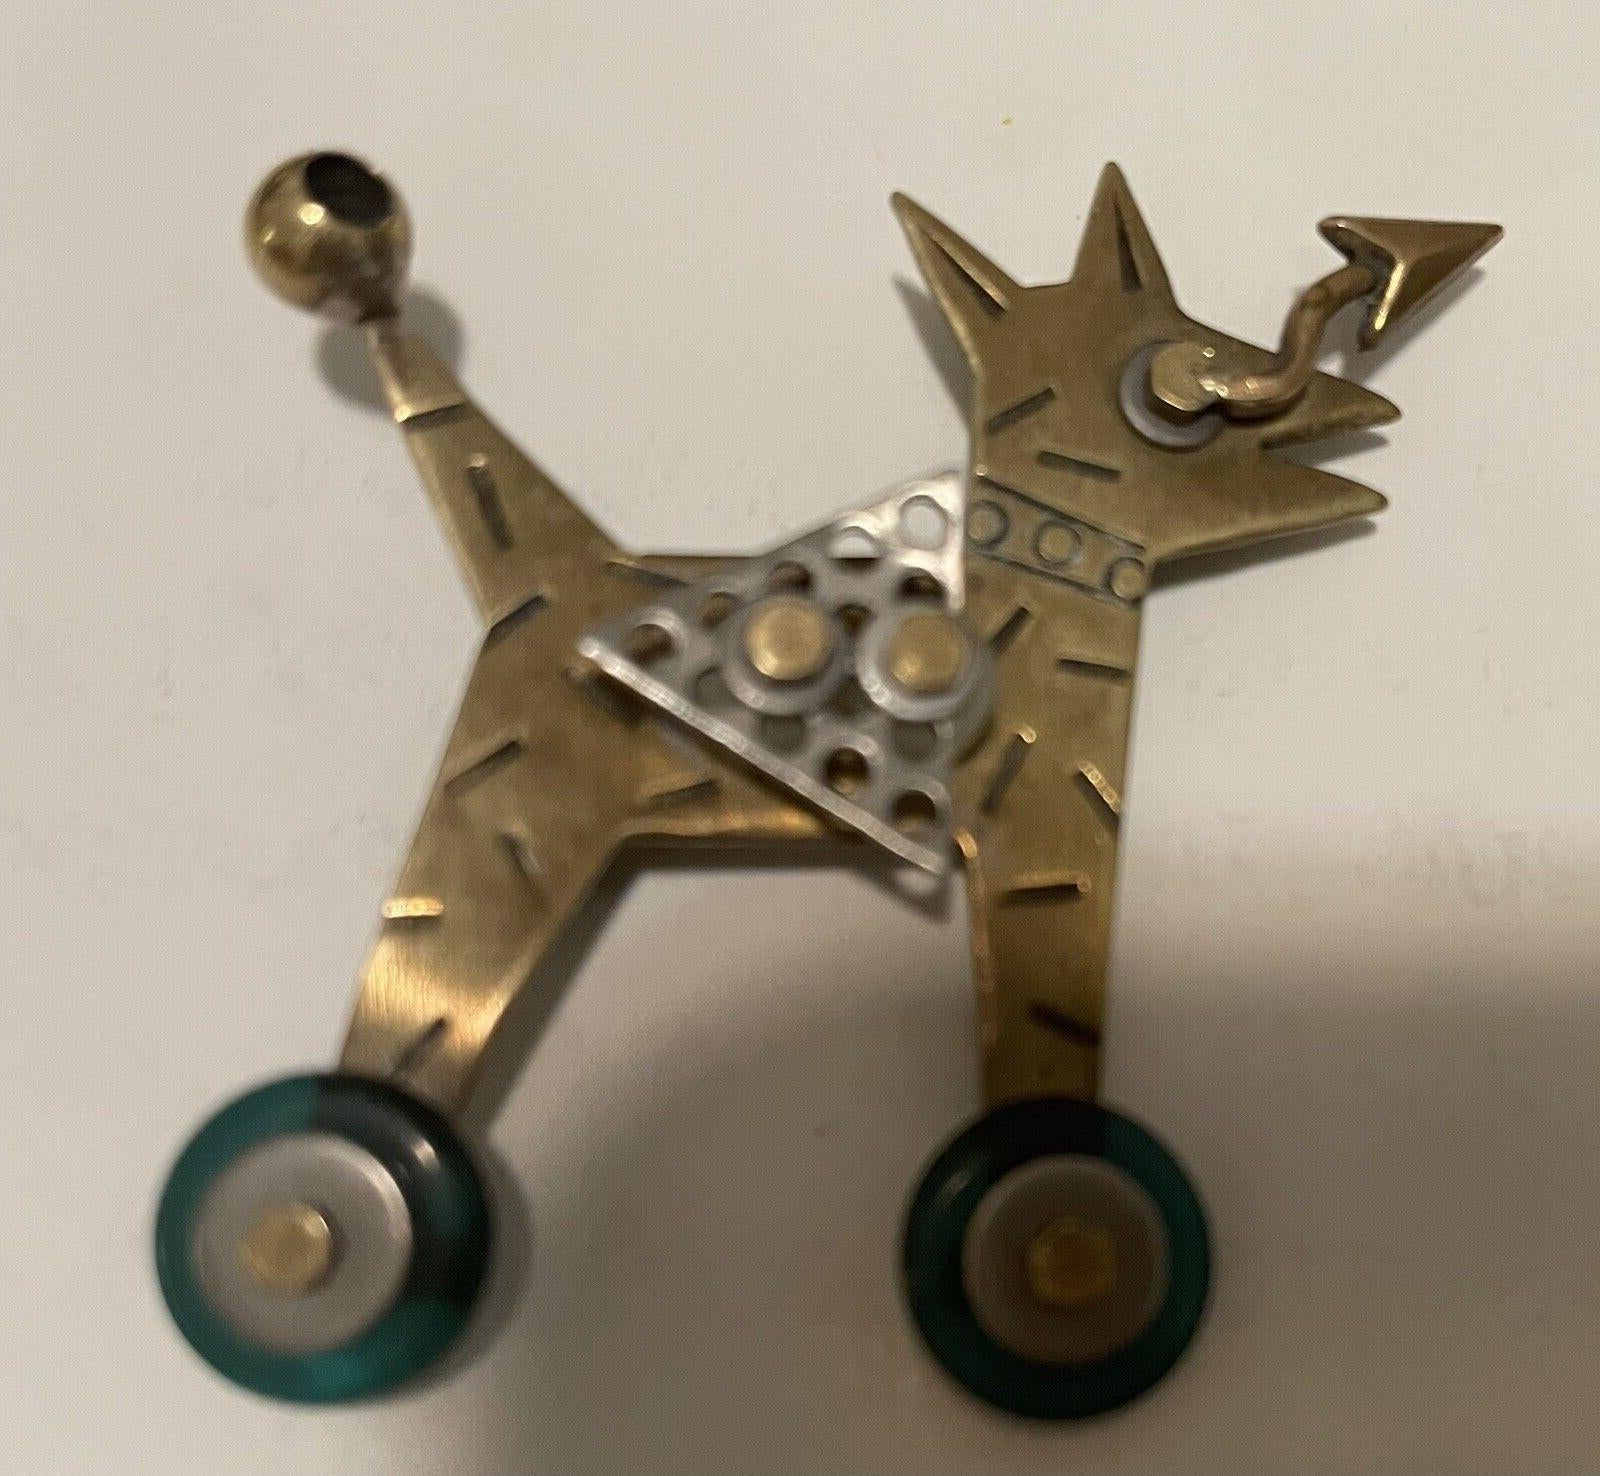 Simply Wonderful! Featuring Designer Thomas Man’s small Dog on Roller Skates Brooch. Crafted well-detailed Metal Art using mixed metals in Brass, Silver, Bronze. Measuring approx. 1.75” high x 1.75” wide. Signed on reverse. A piece sure to enhance